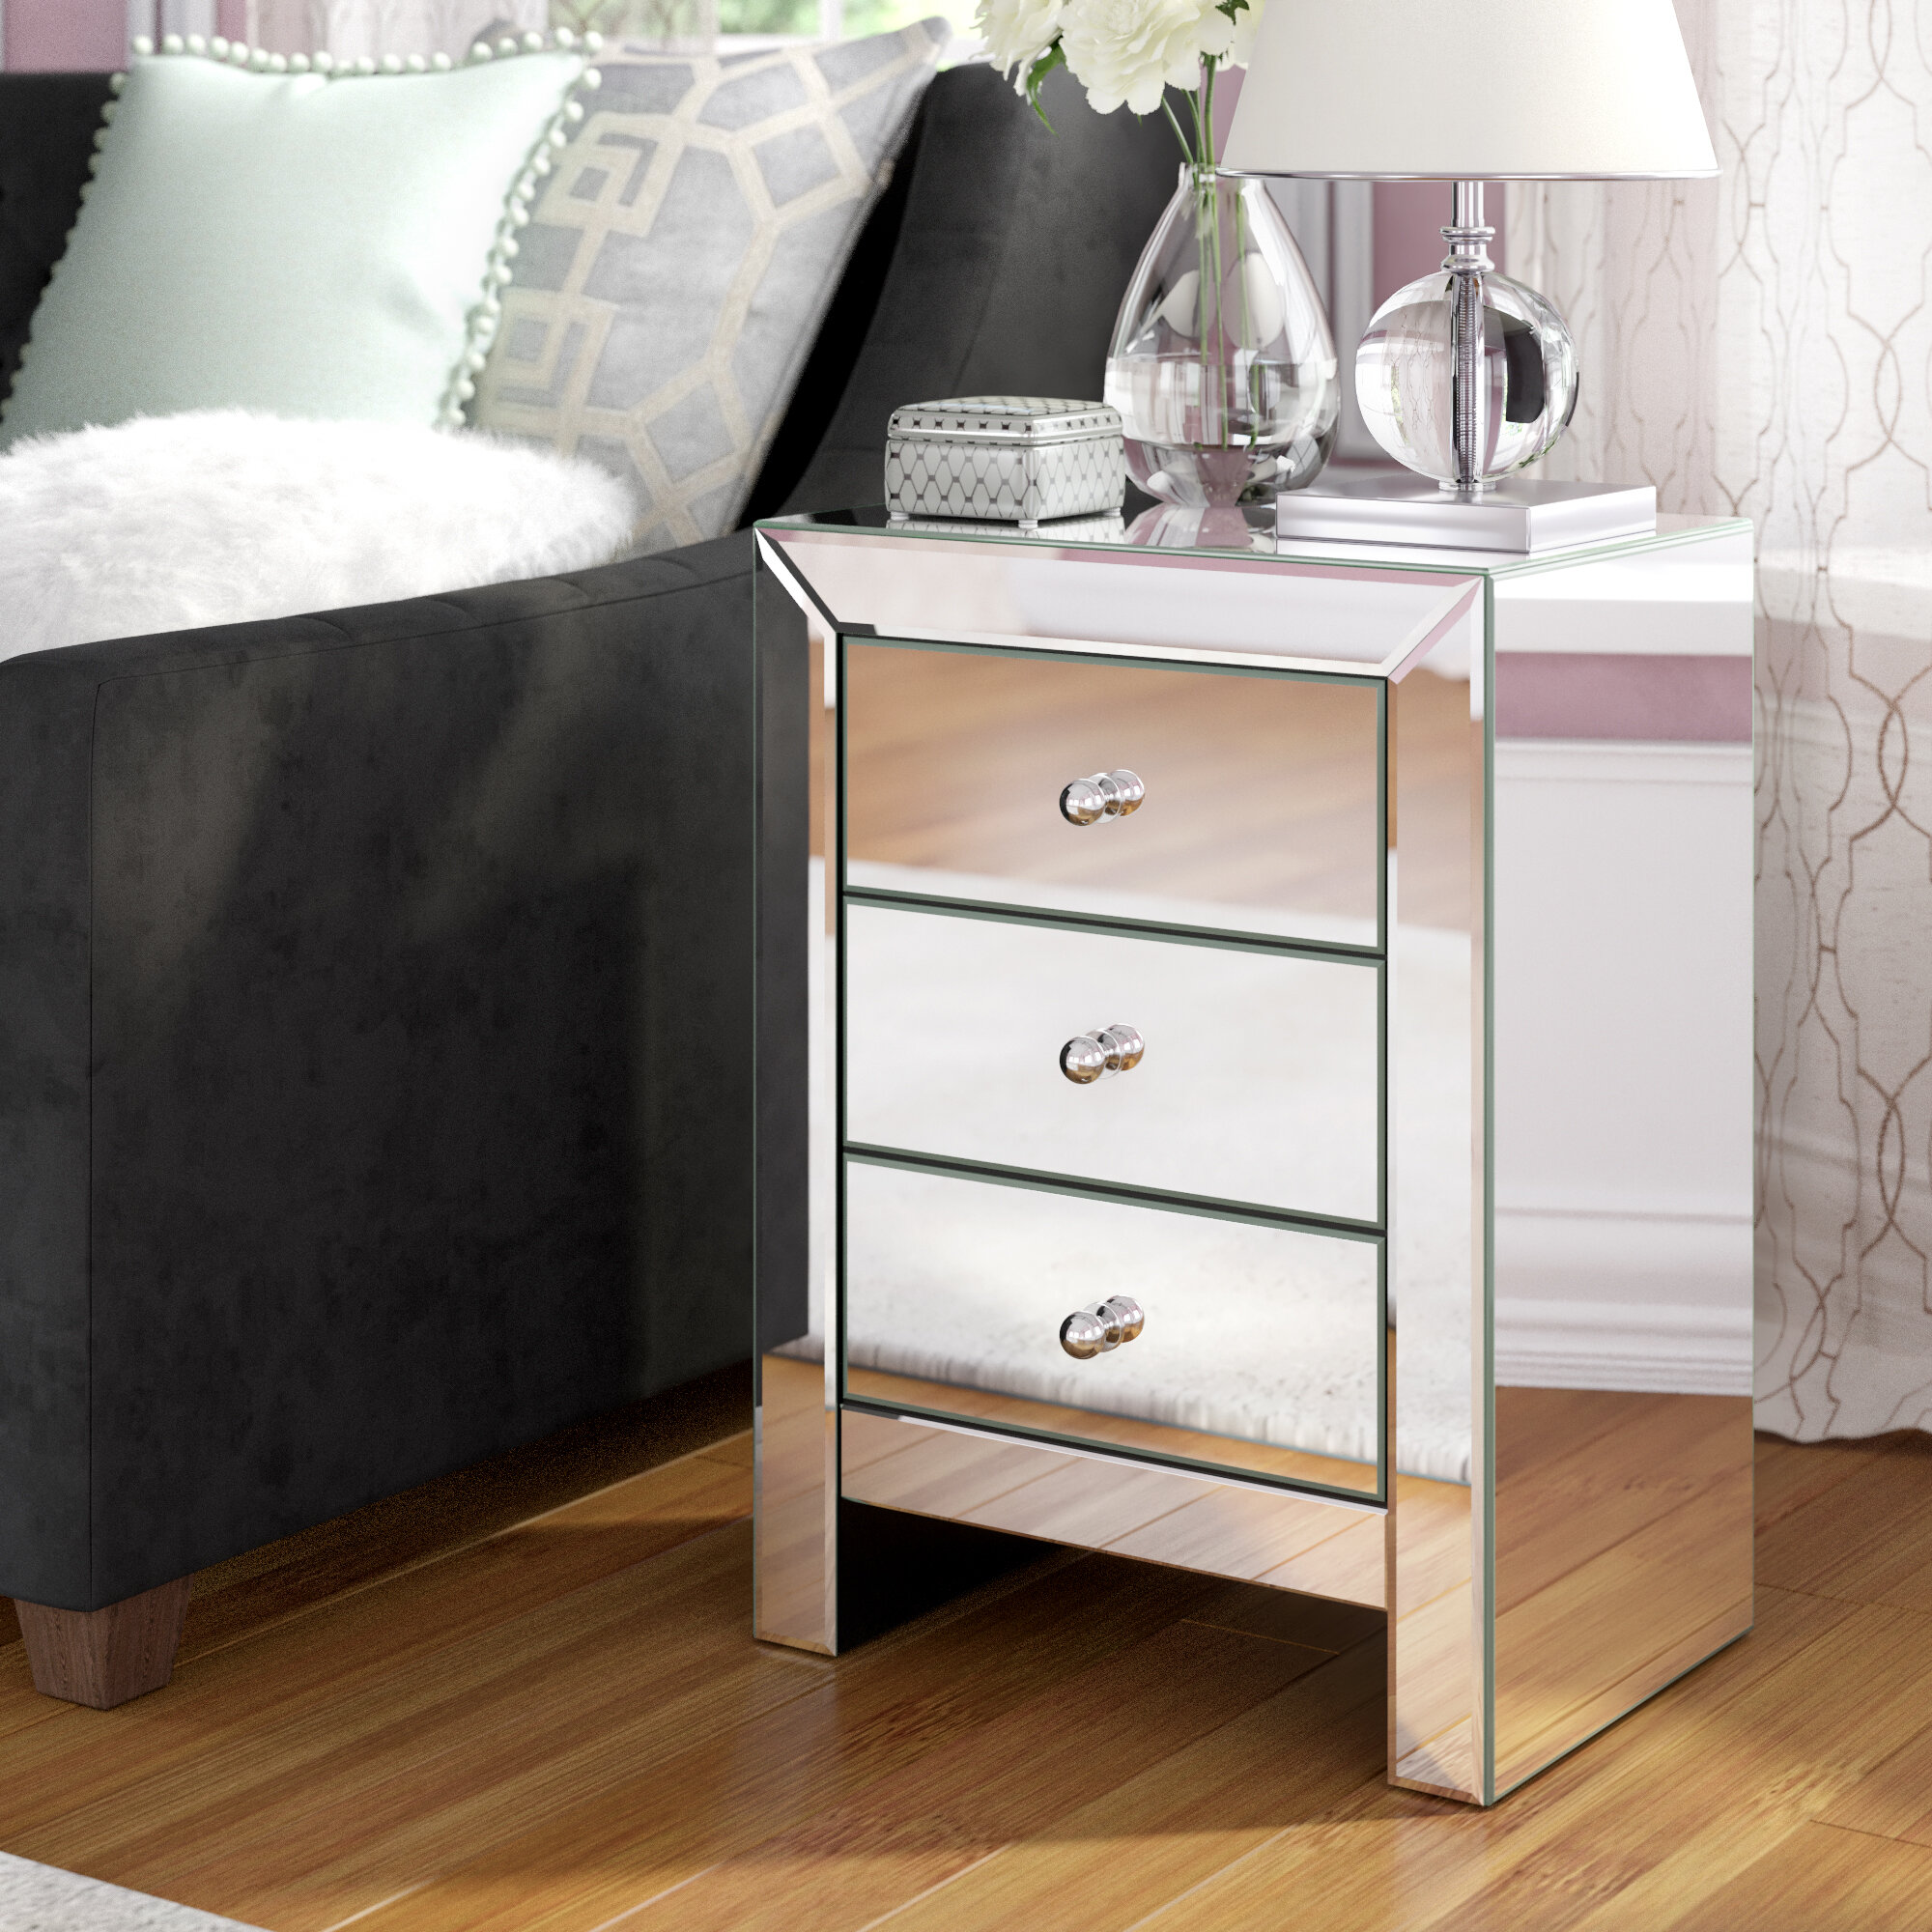 Mirrored Nightstands You Ll Love In 2021 Wayfair Add our gatsby pos card system so you can sell this furniture range to your customers without the need to carry large items in stock. mirrored nightstands you ll love in